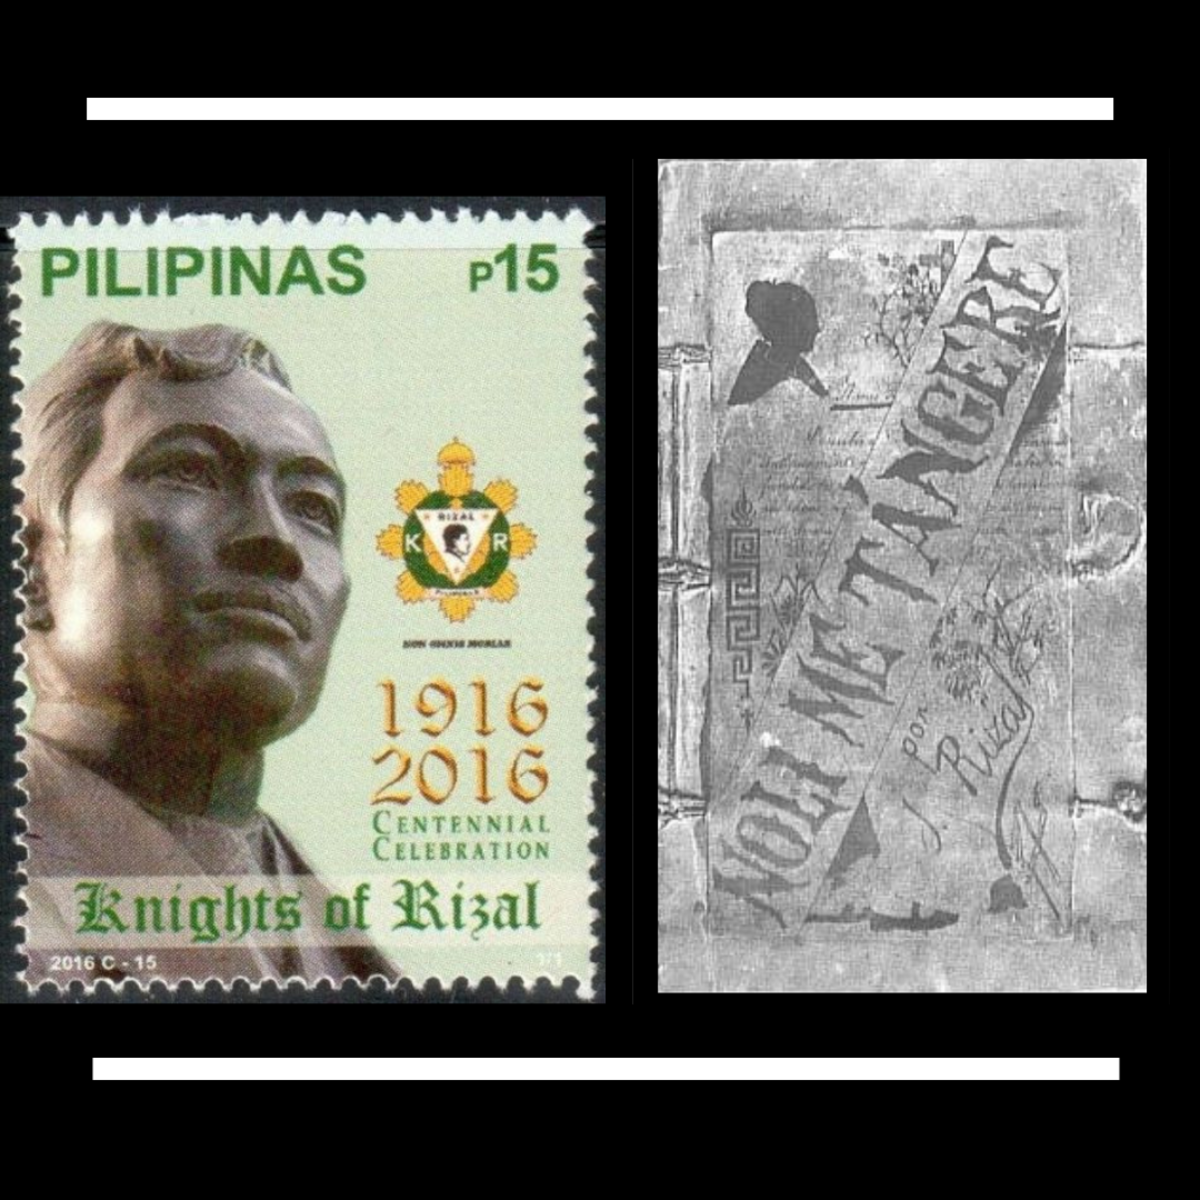 Left: Knights of Rizal Centennial Stamp (2016) / Right: Cover of Noli Me Tangere (https://commons.wikimedia.org/wiki/File:Noli_Me_Tangere.jpg)